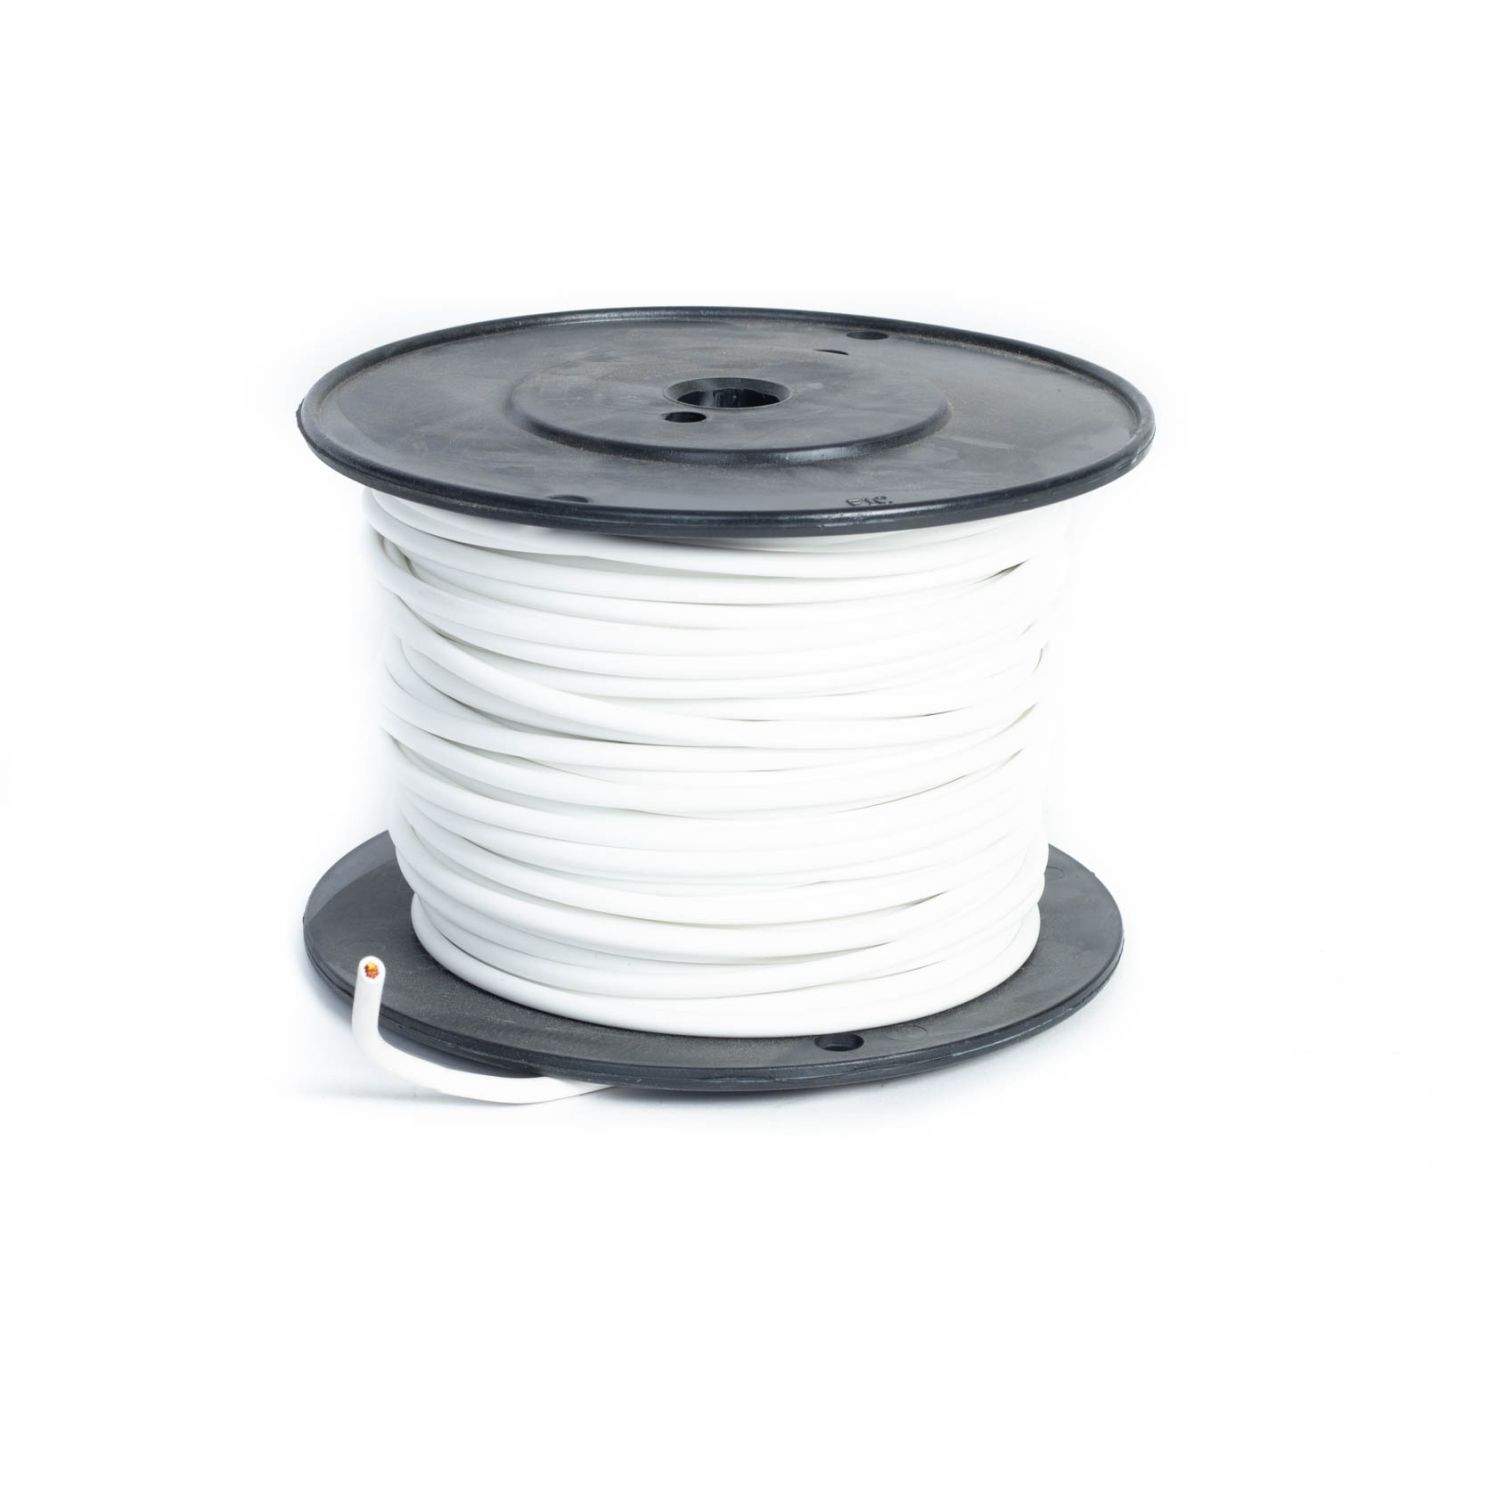 GXL10-9 Primary White Conductor Wire 10-Gauge